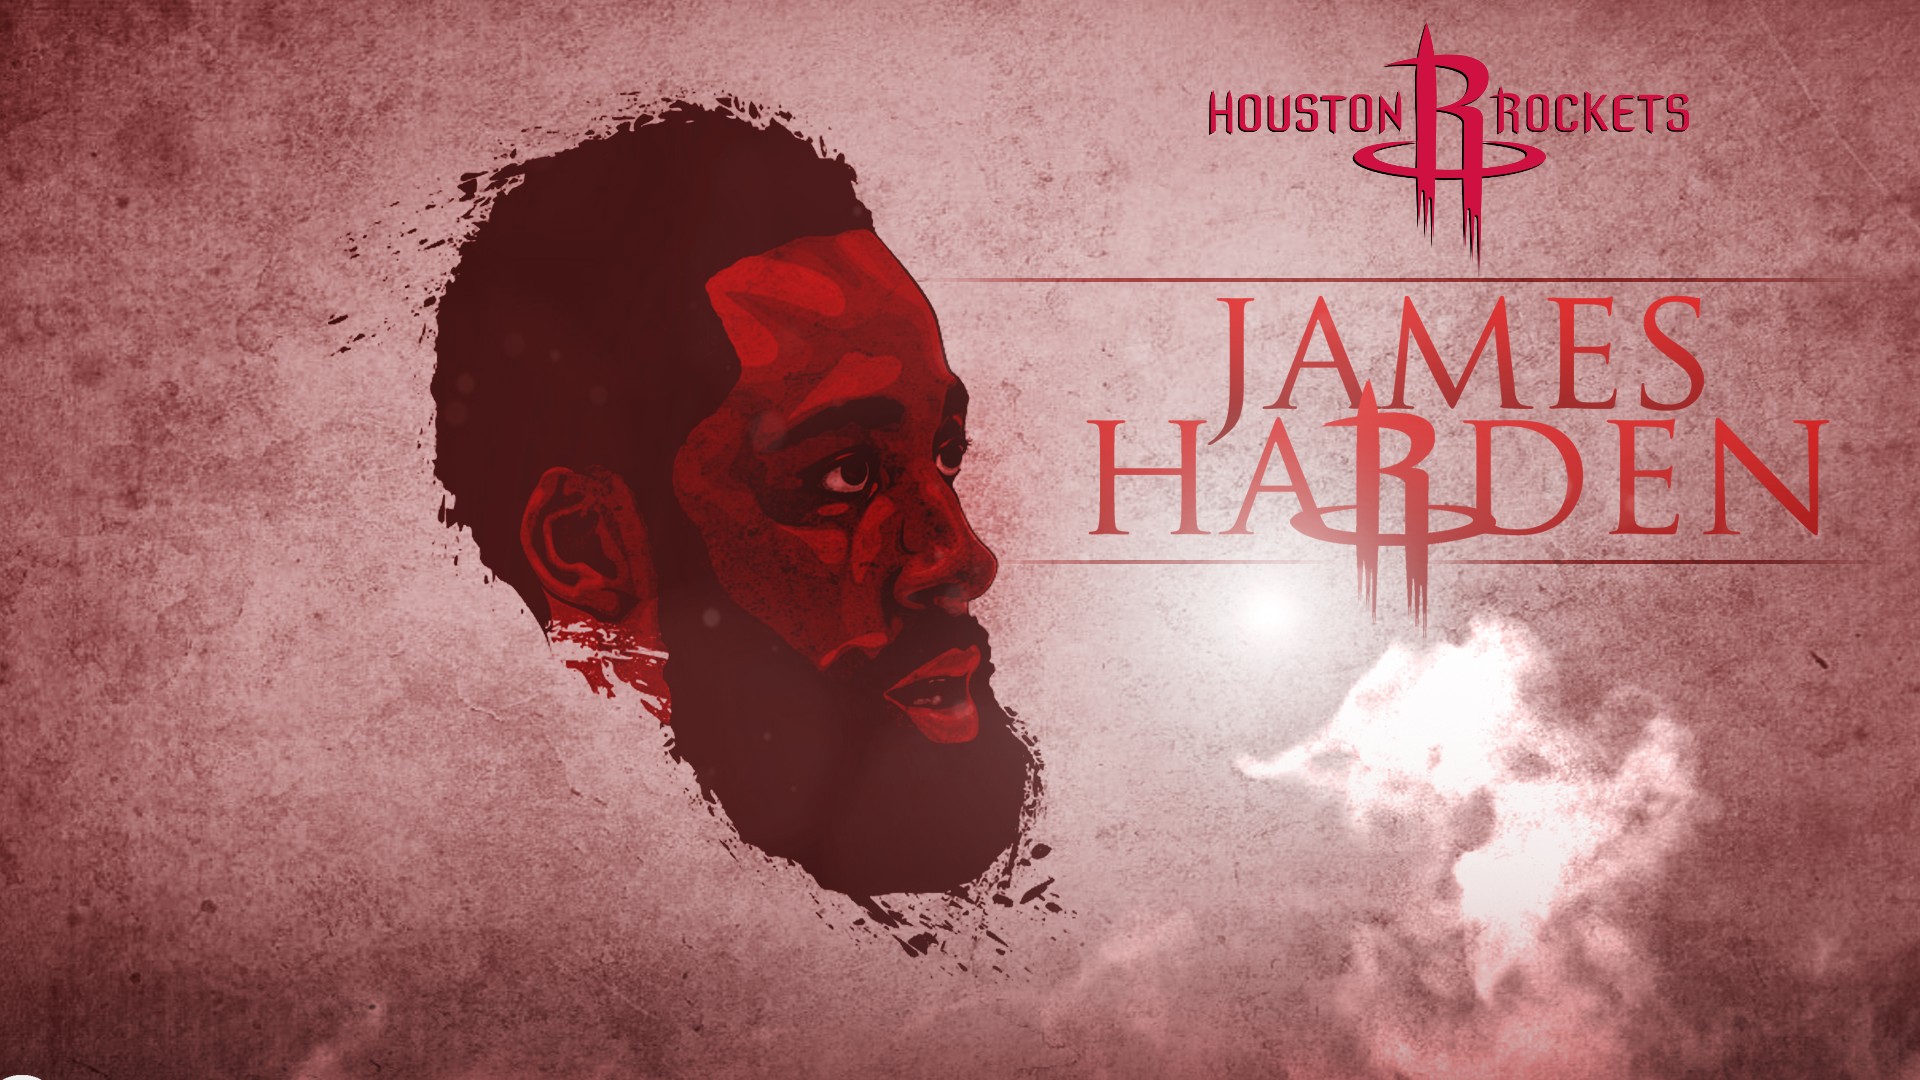 HD Backgrounds James Harden with image dimensions 1920x1080 pixel. You can make this wallpaper for your Desktop Computer Backgrounds, Windows or Mac Screensavers, iPhone Lock screen, Tablet or Android and another Mobile Phone device